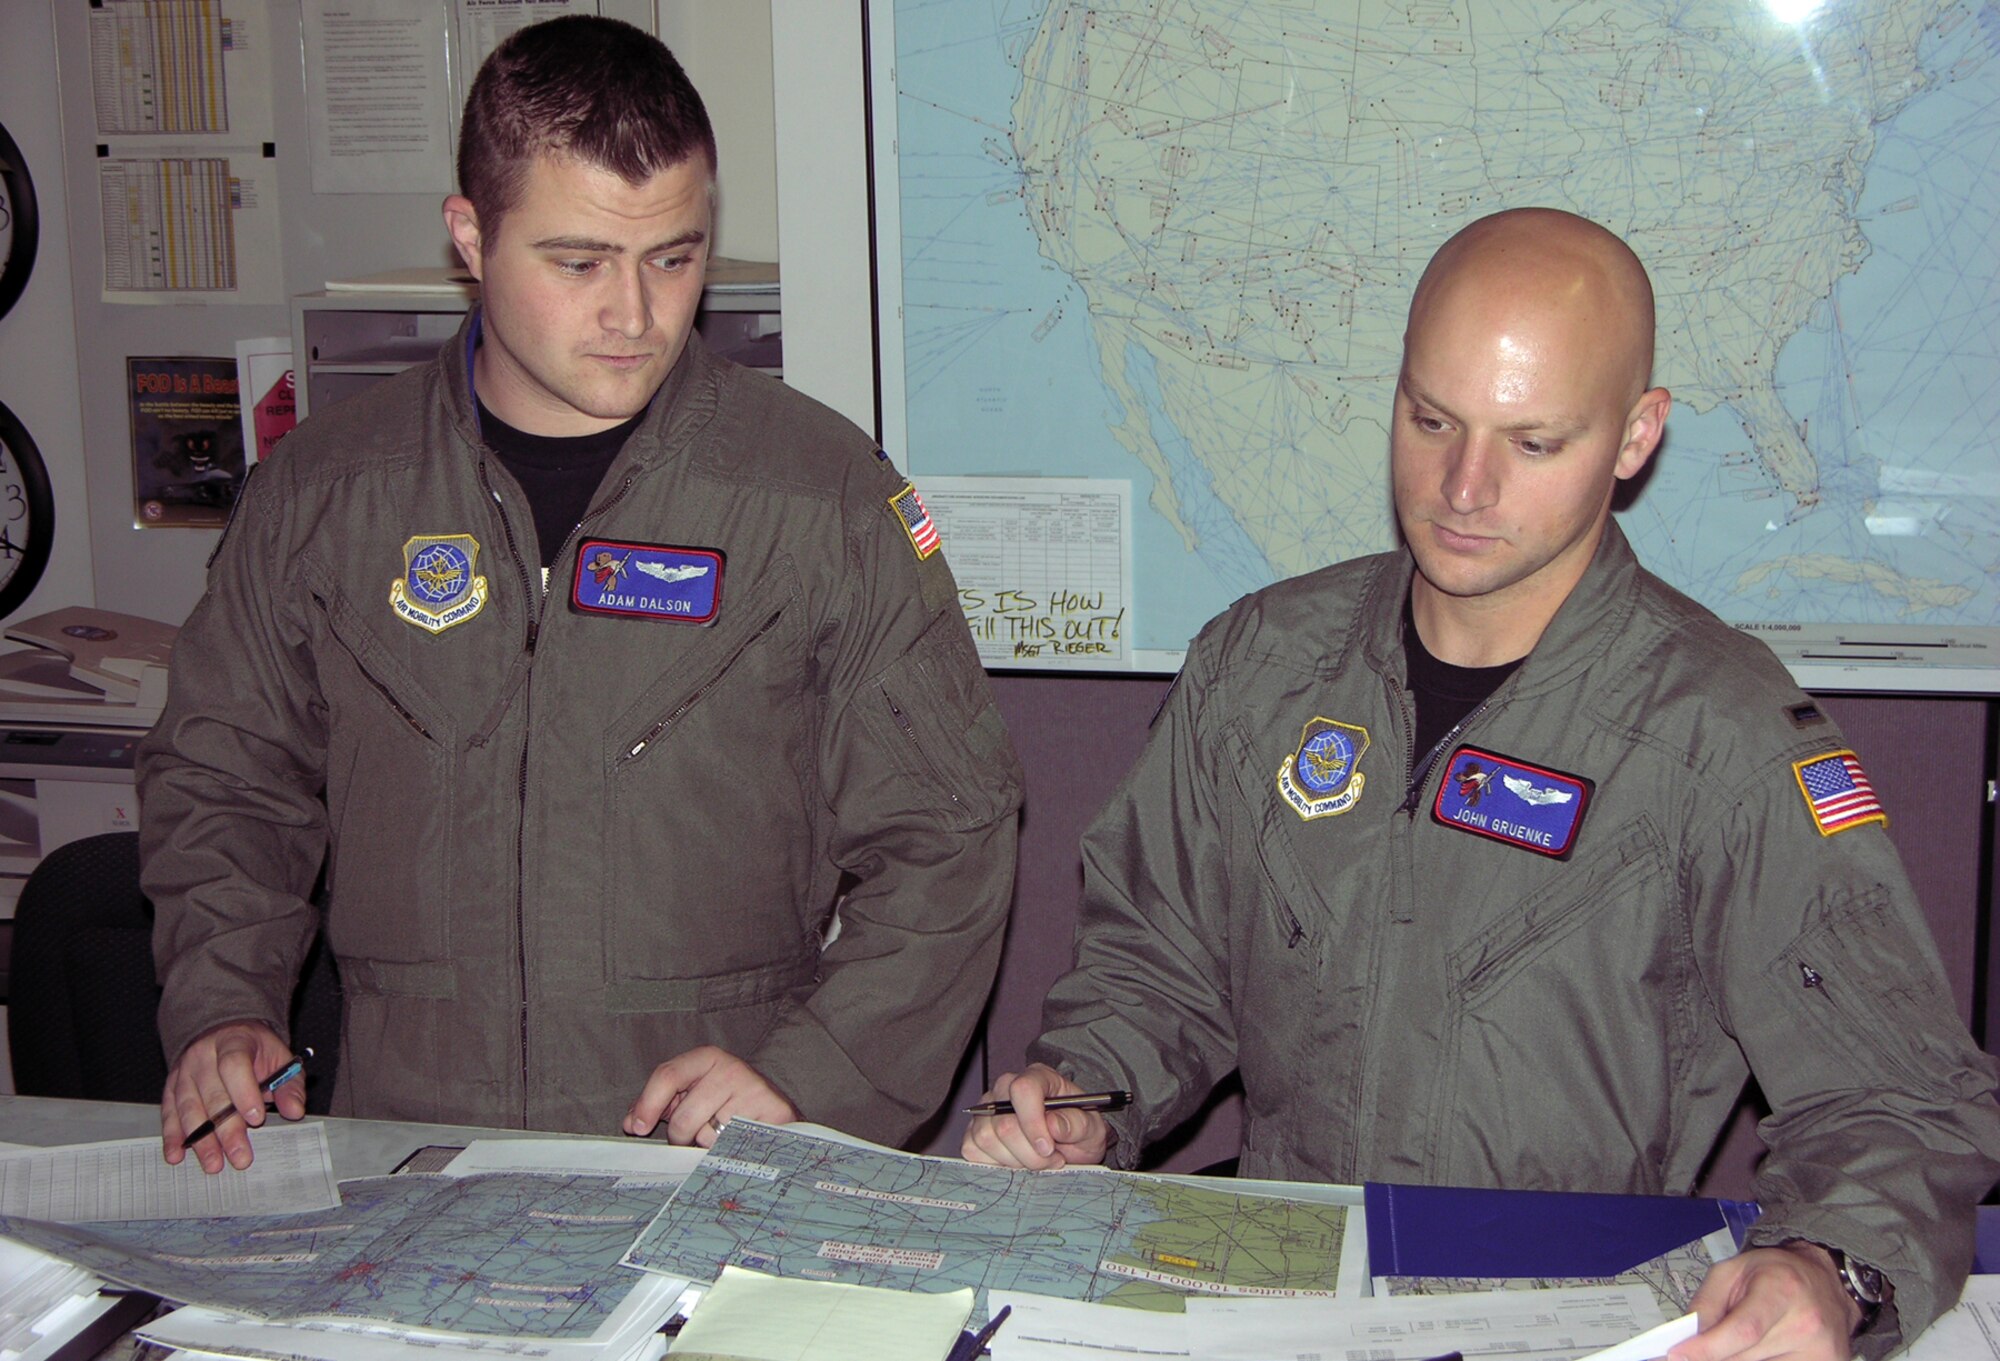 First Lt. Adam Dalson, left, a 349th Air Refueling Squadron pilot, and 1st Lt. John Gruenke, a 349th ARS navigator, review charts and maps, Jan. 19, to plan for an upcoming flying mission. (Photo by Master Sgt. Darlene Foote, 22nd ARW Public Affairs)